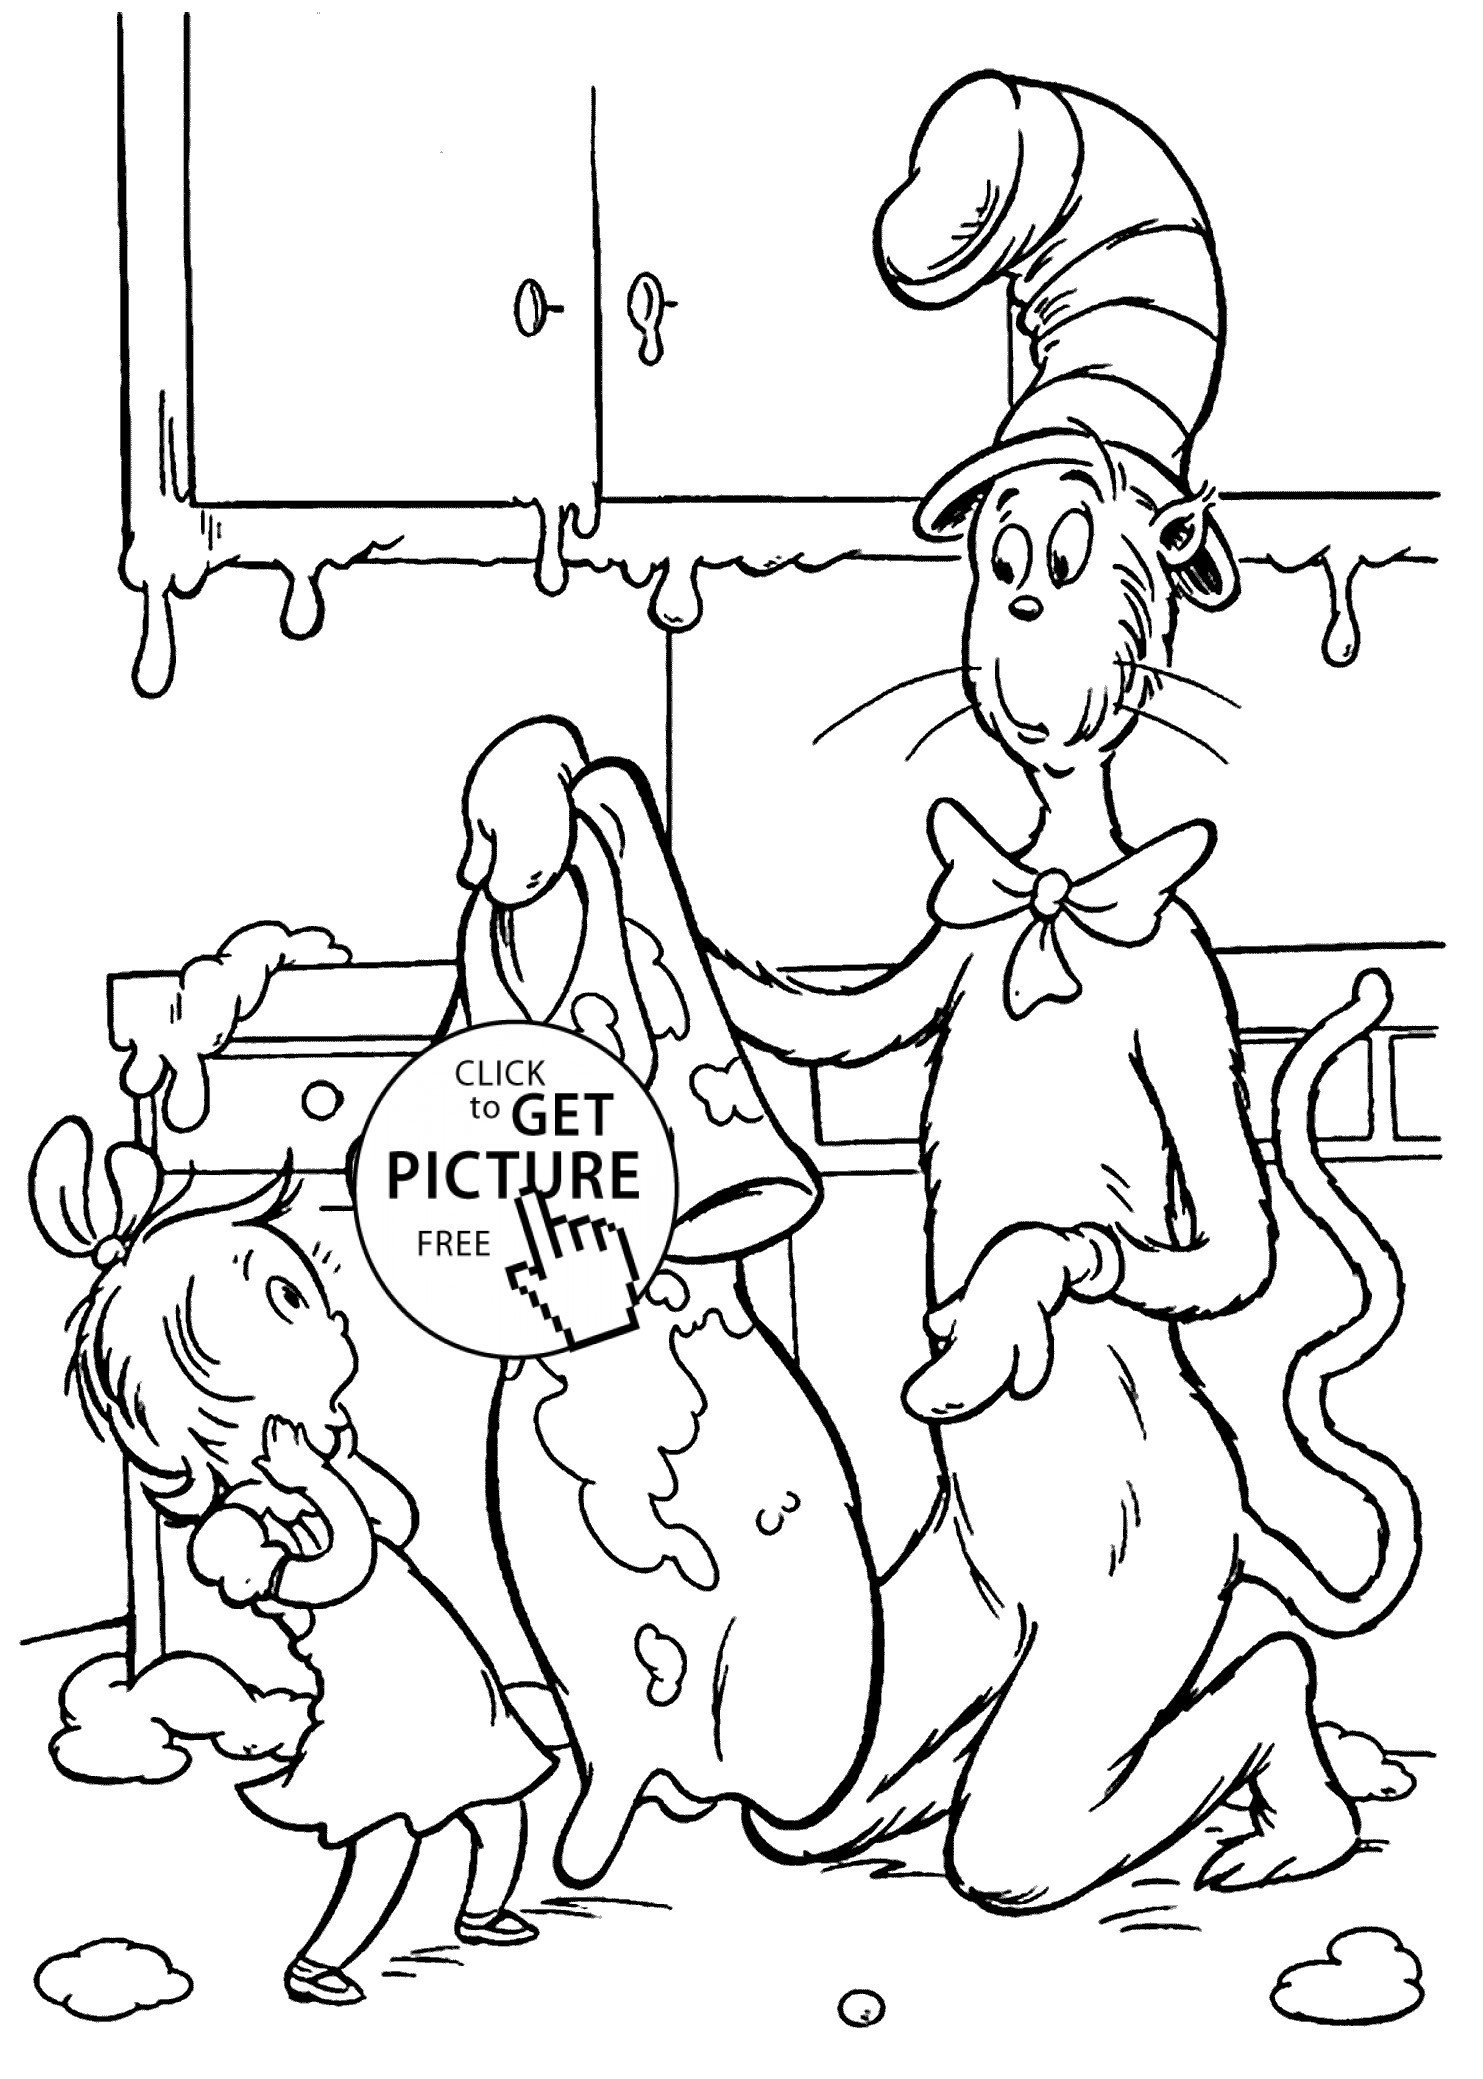 Dr Seuss Coloring Pages Cat In the Hat Wallpaper